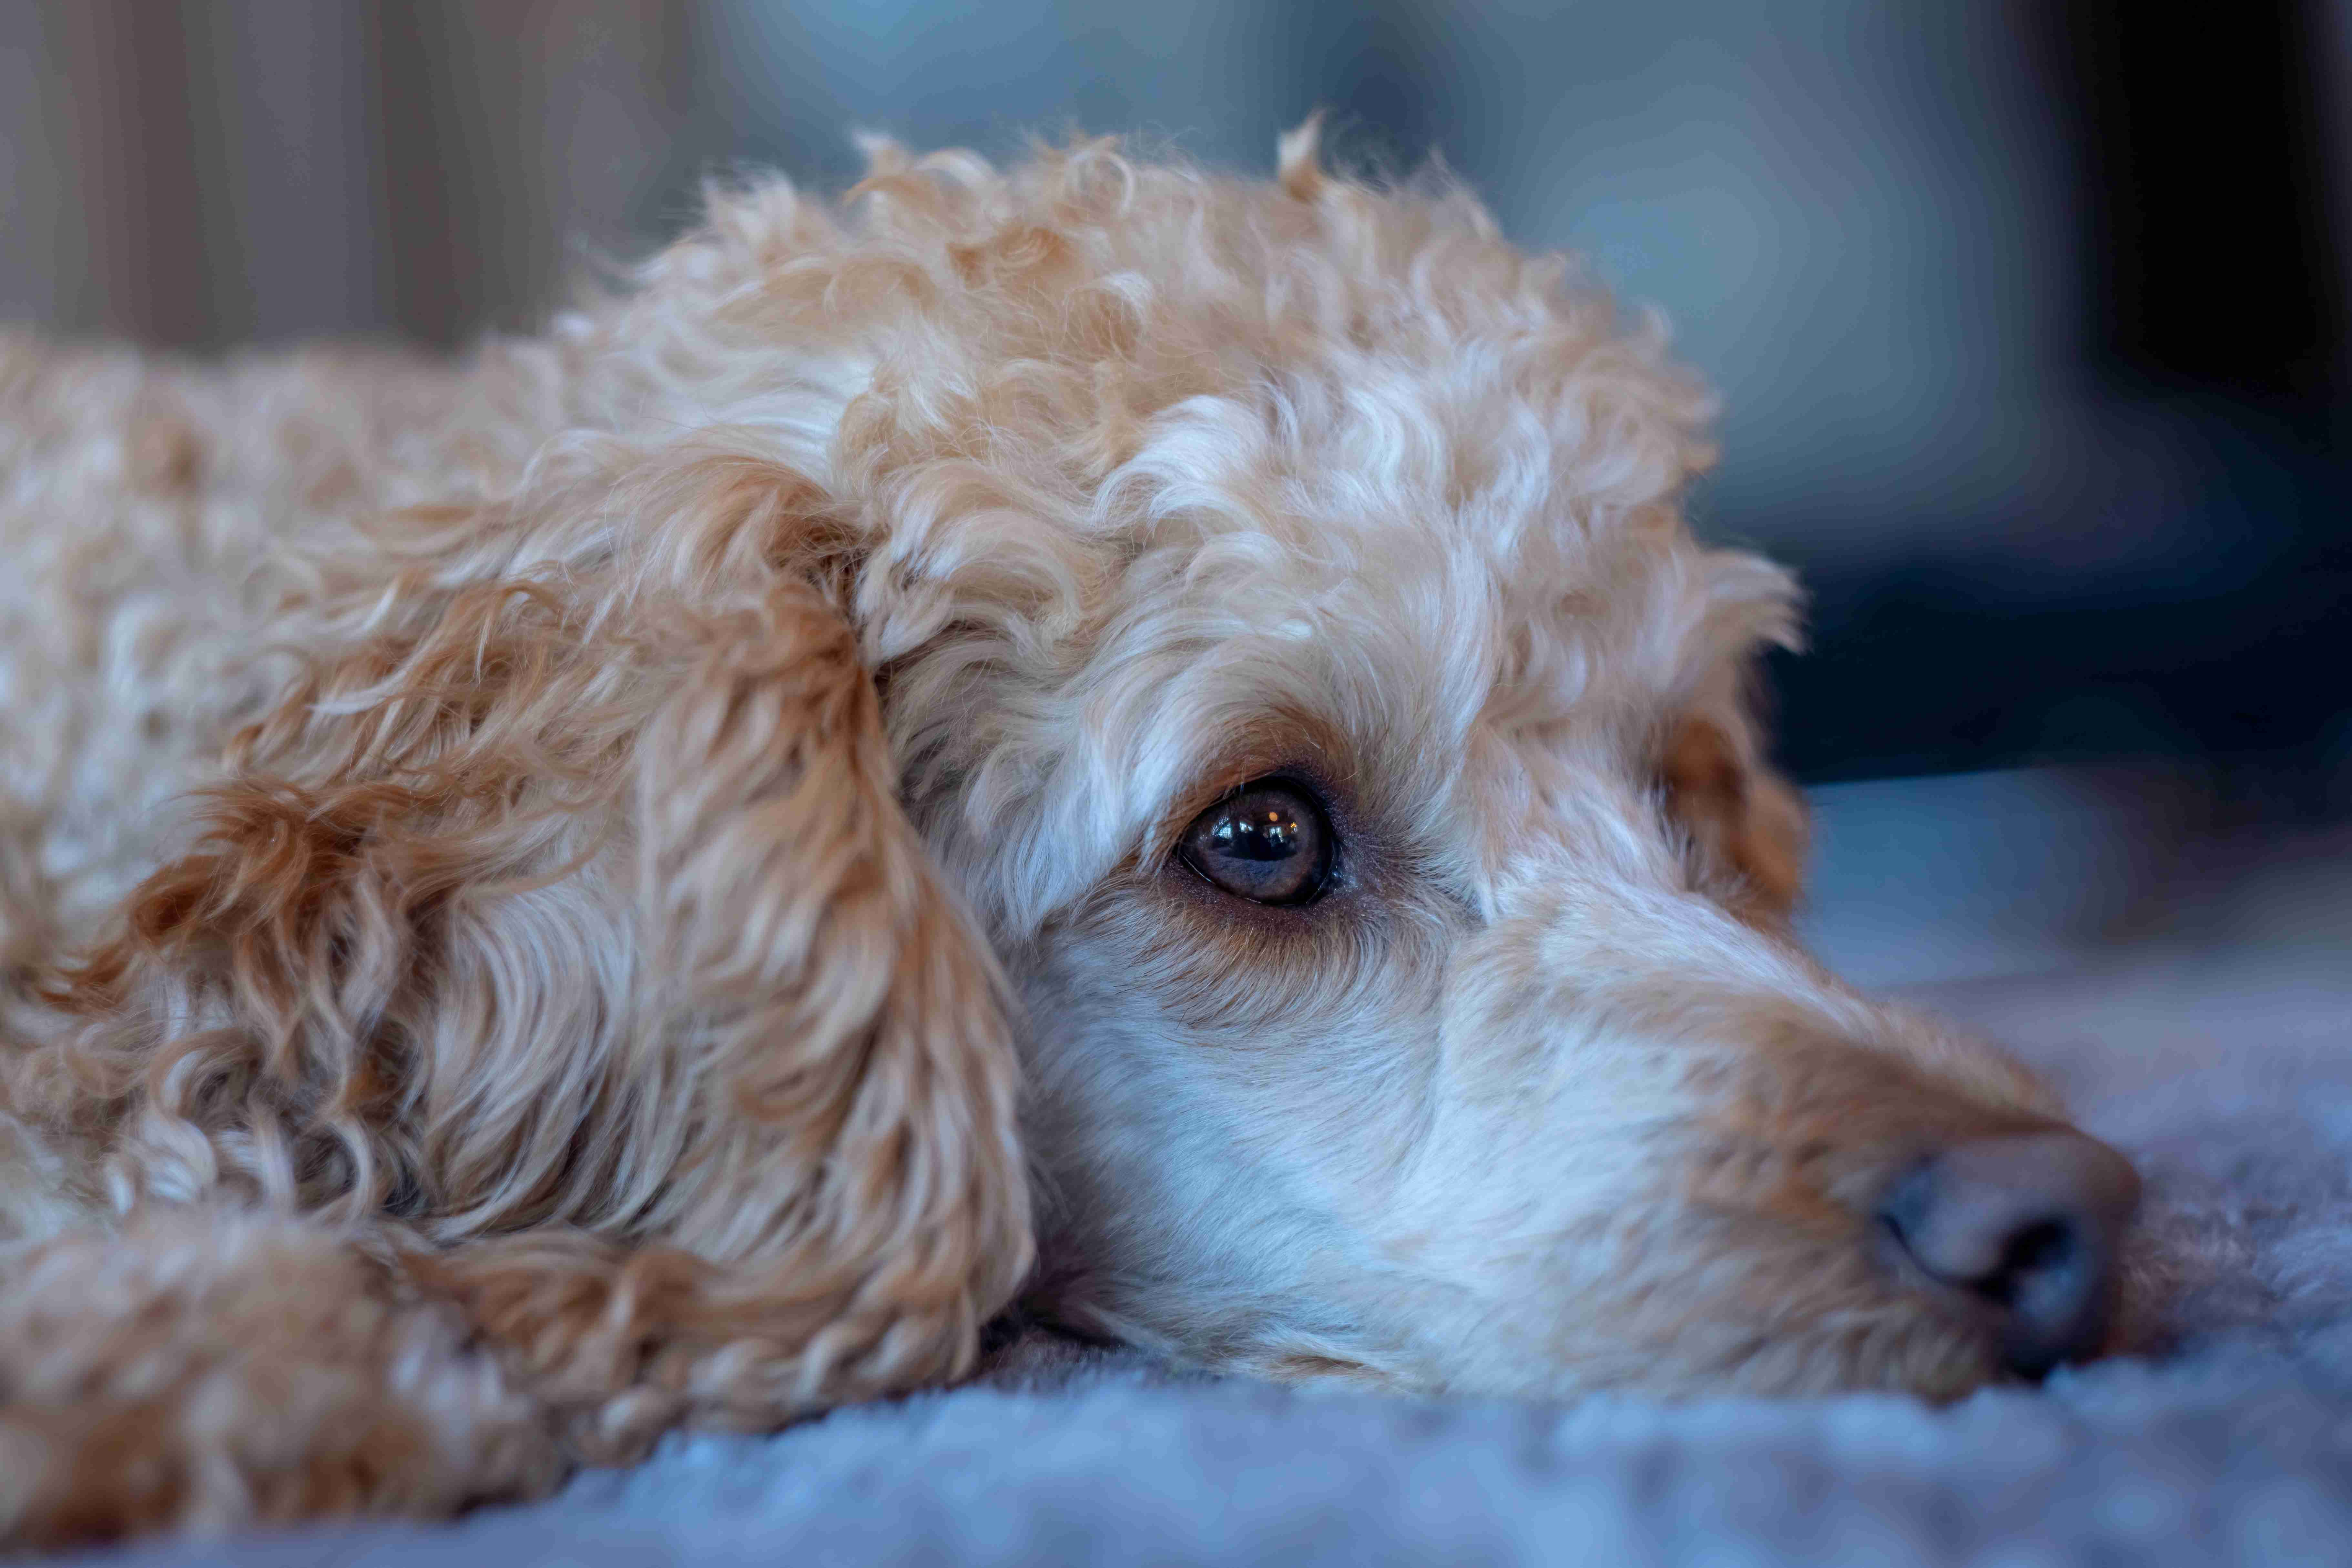 How can you prevent your Poodle puppy from developing destructive behaviors?